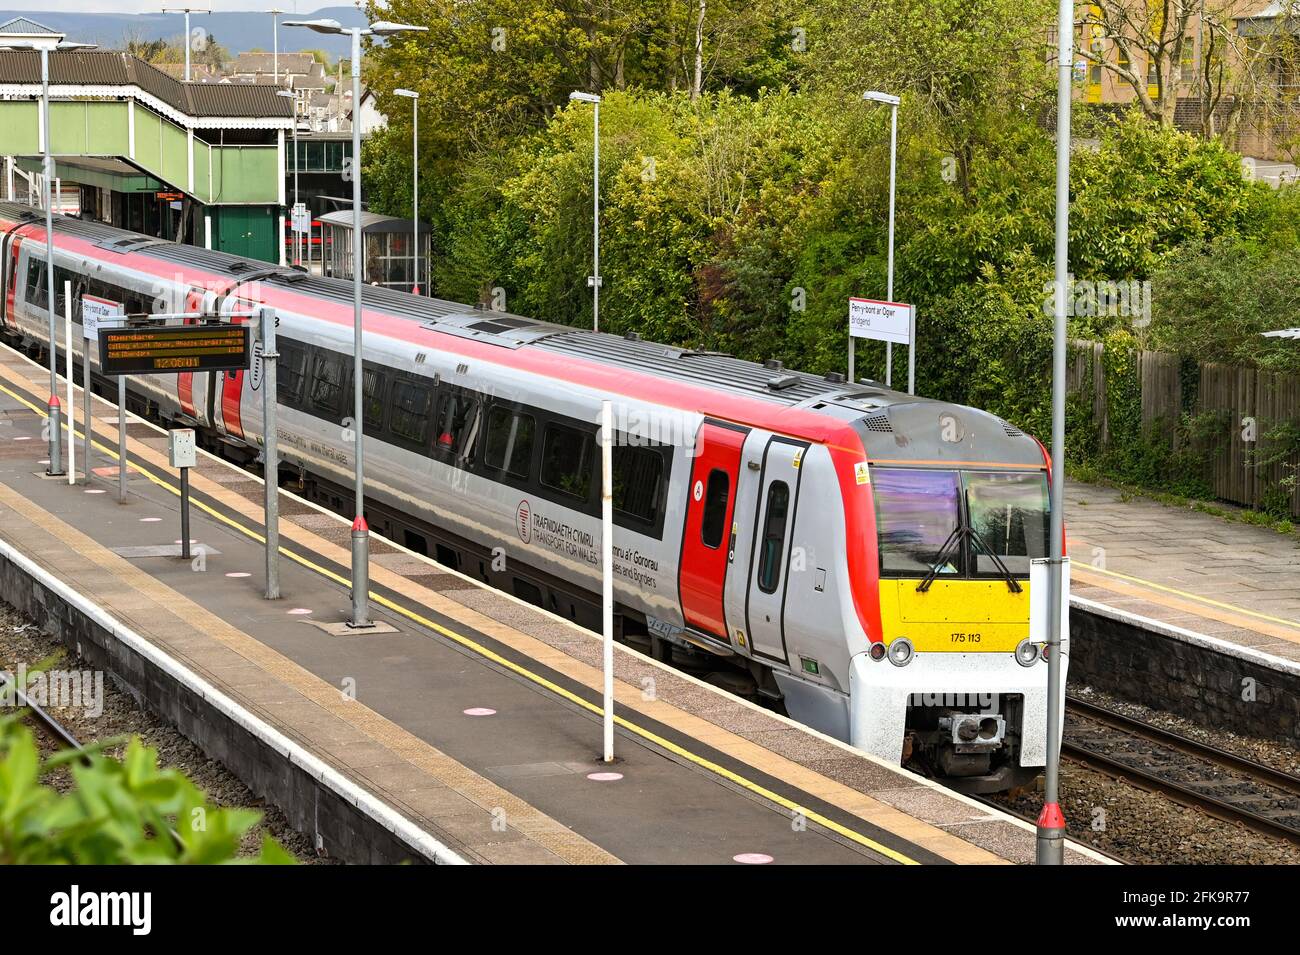 Bridgend, Wales - April 2021: Train operated by Transport for Wales at one of the platforms at Bridgend railway station. Stock Photo